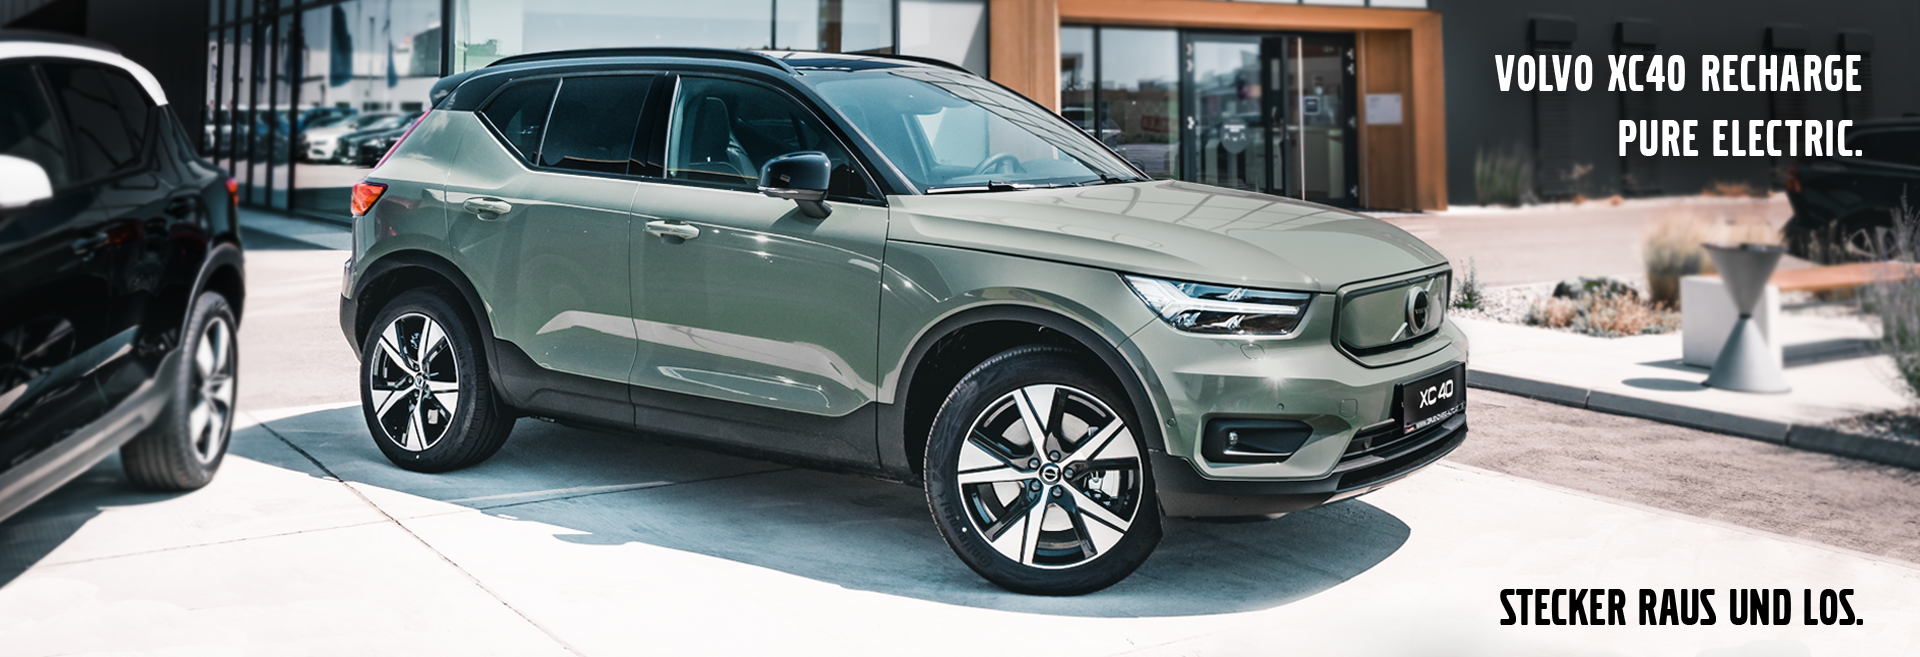 Der Volvo XC40 Recharge Pure Electric